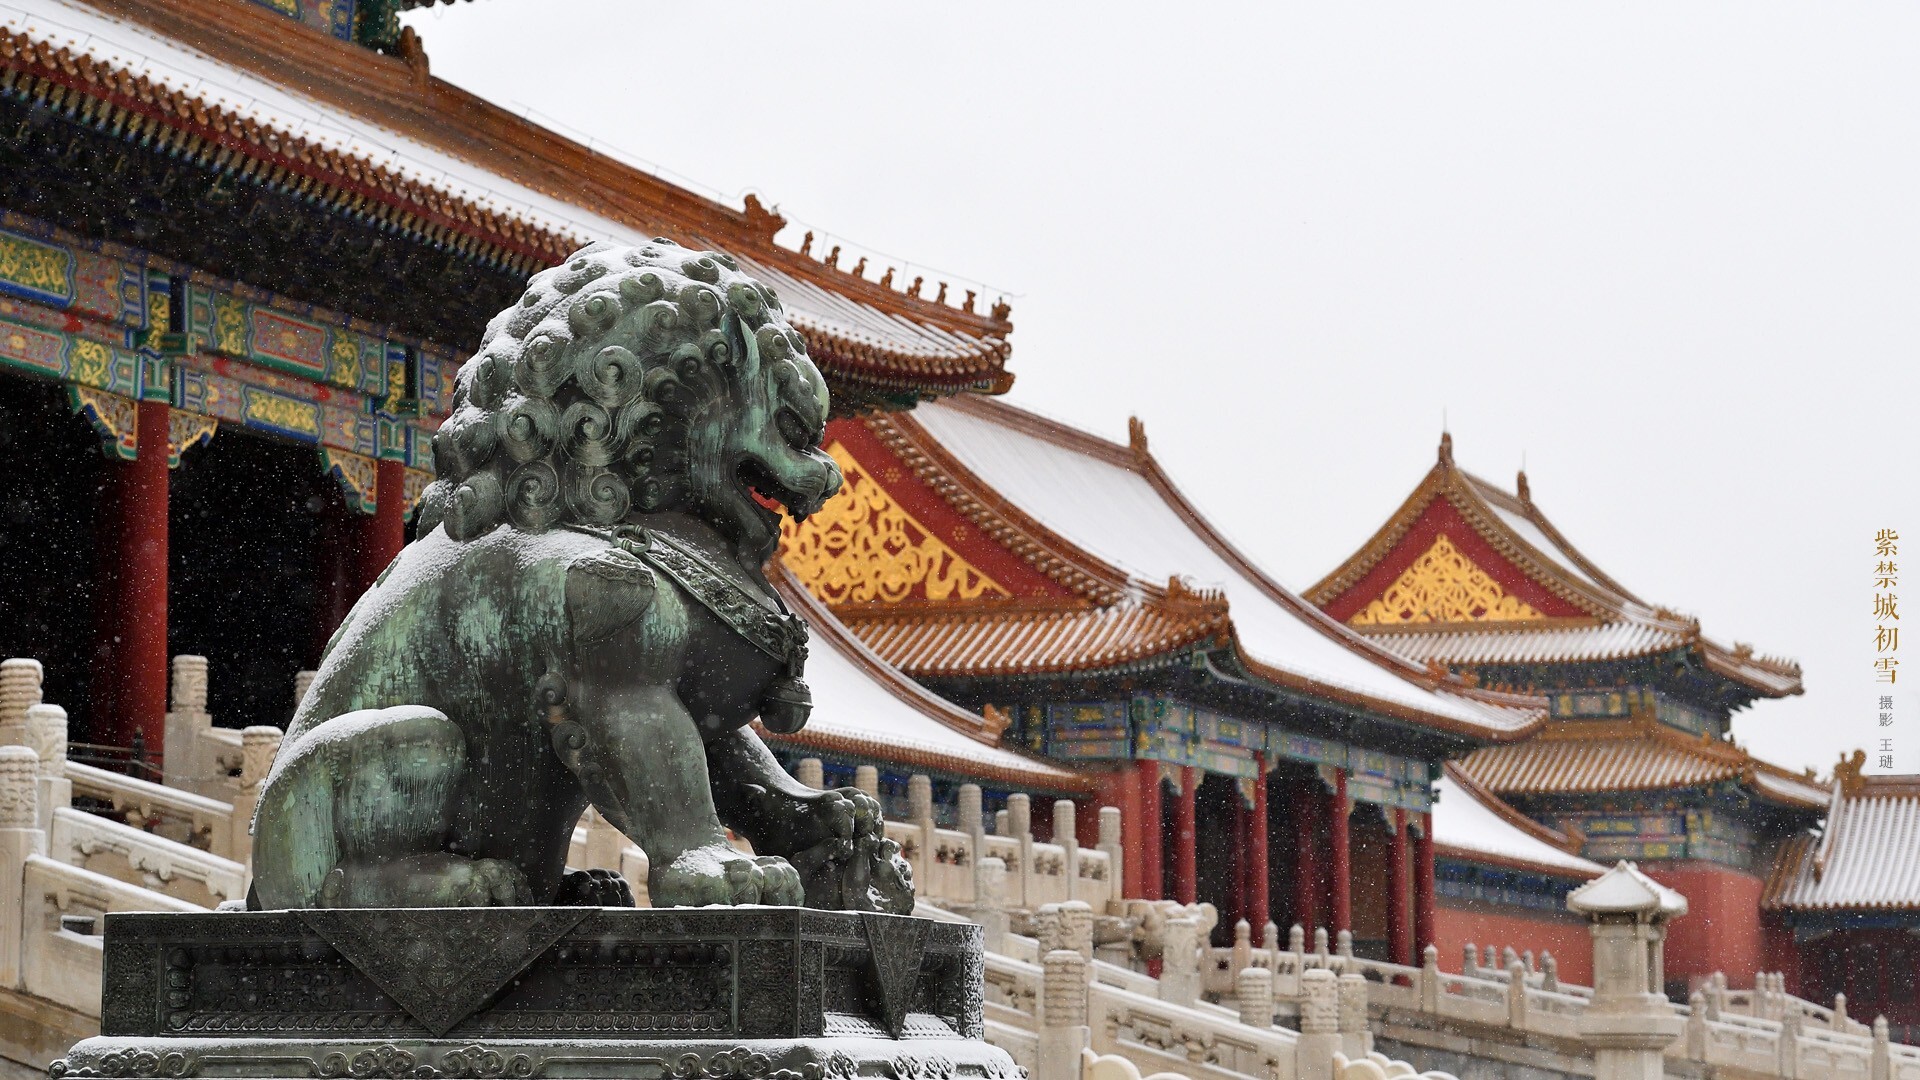 History of the Forbidden City — 1402 to the Present